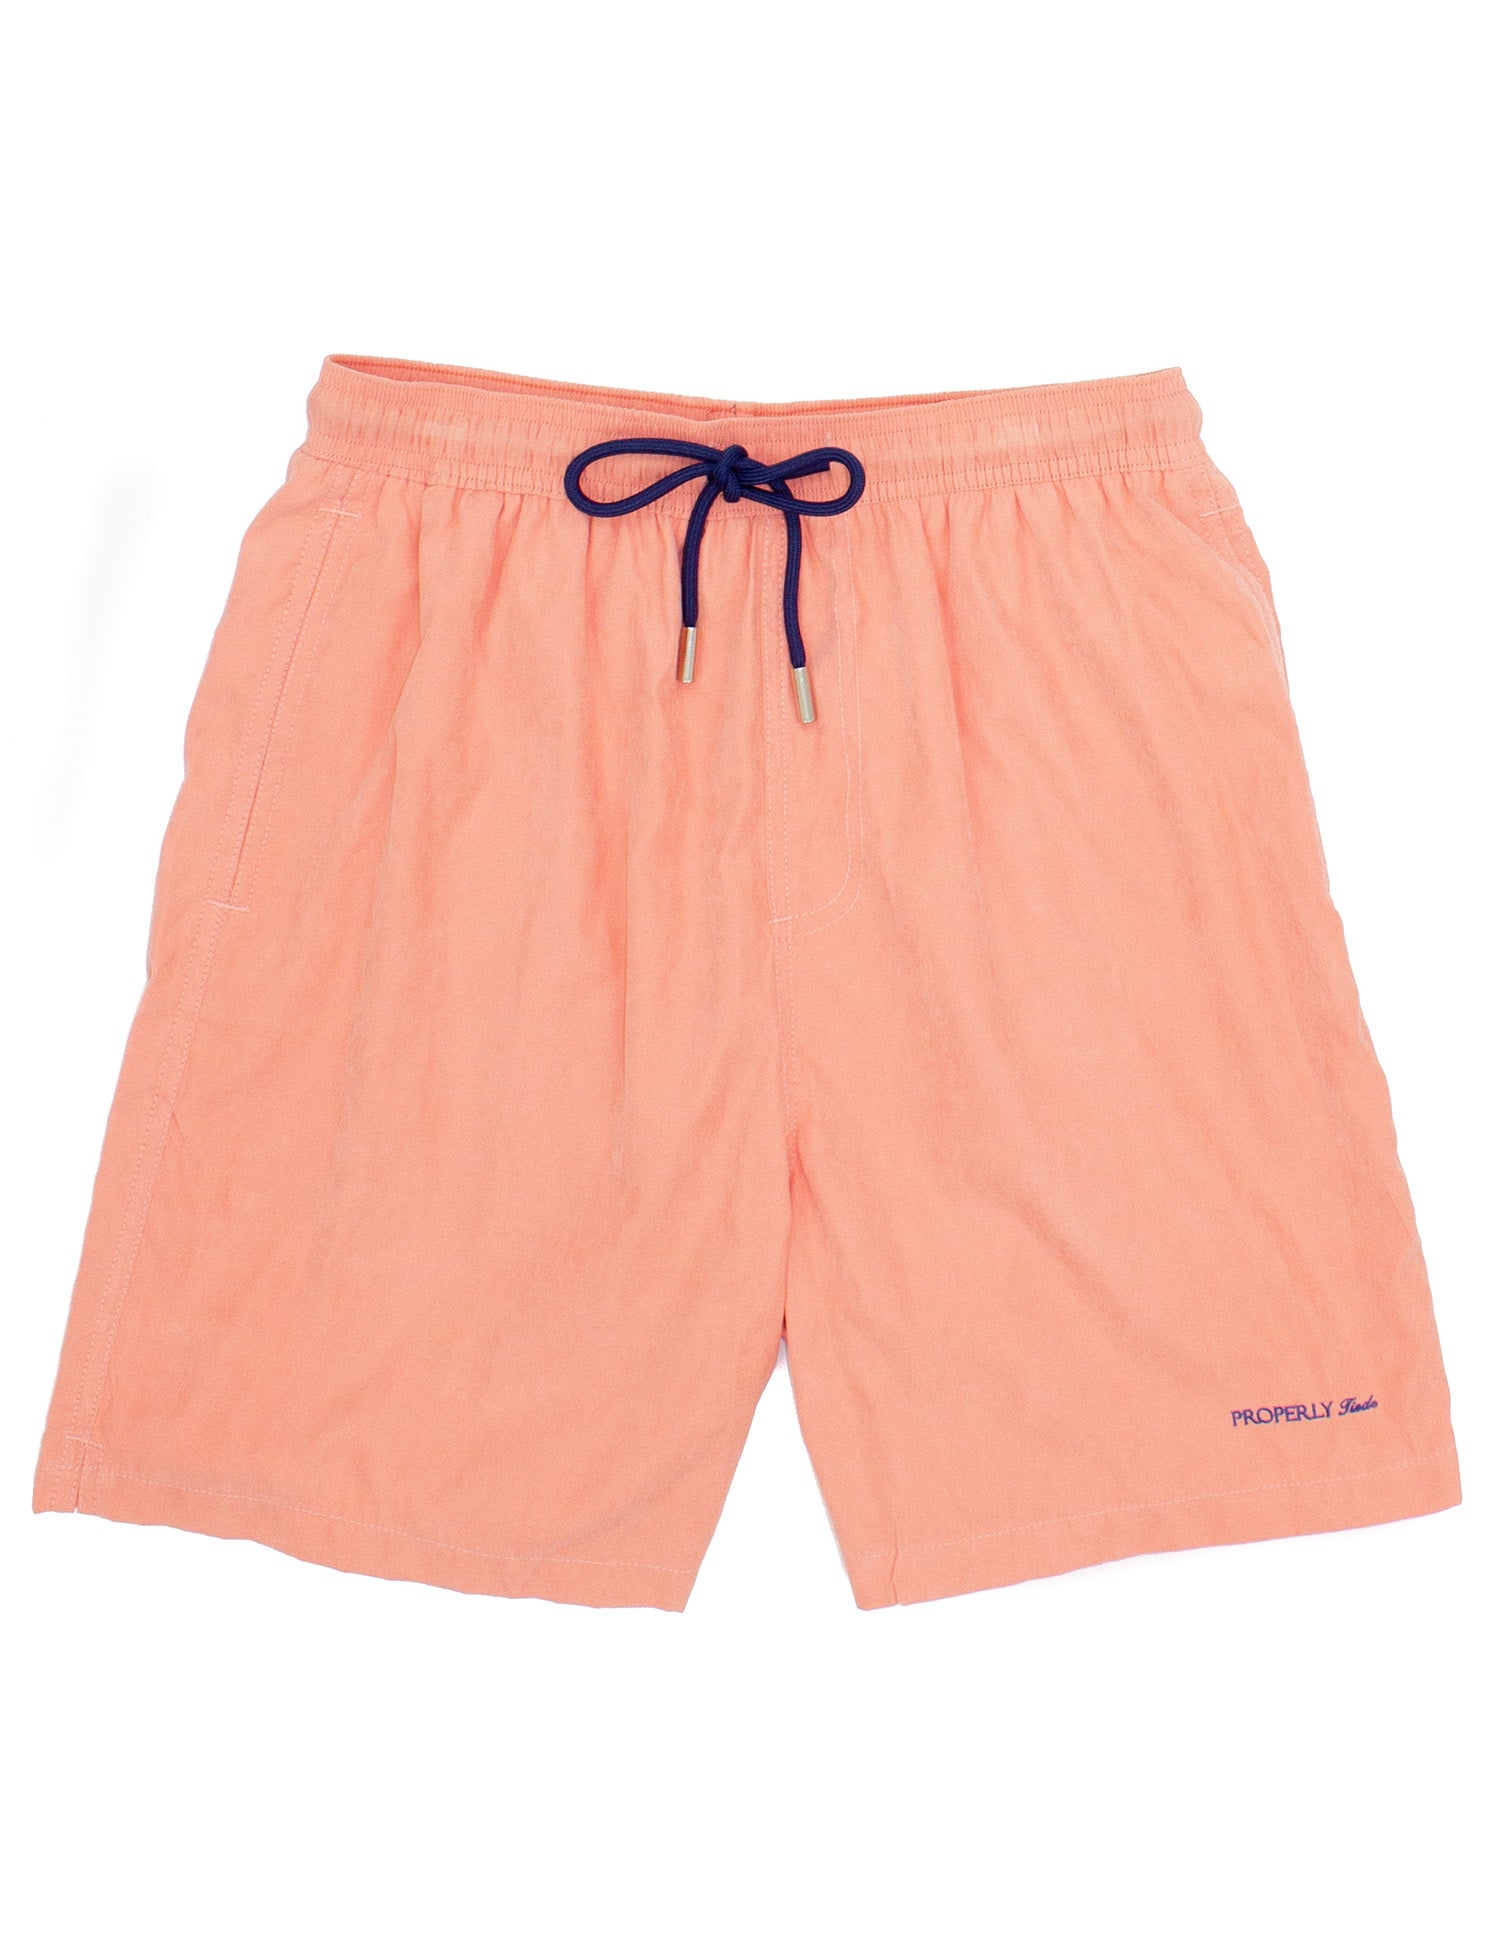 Mens Board Shorts Collection: Dive into Style & Comfort